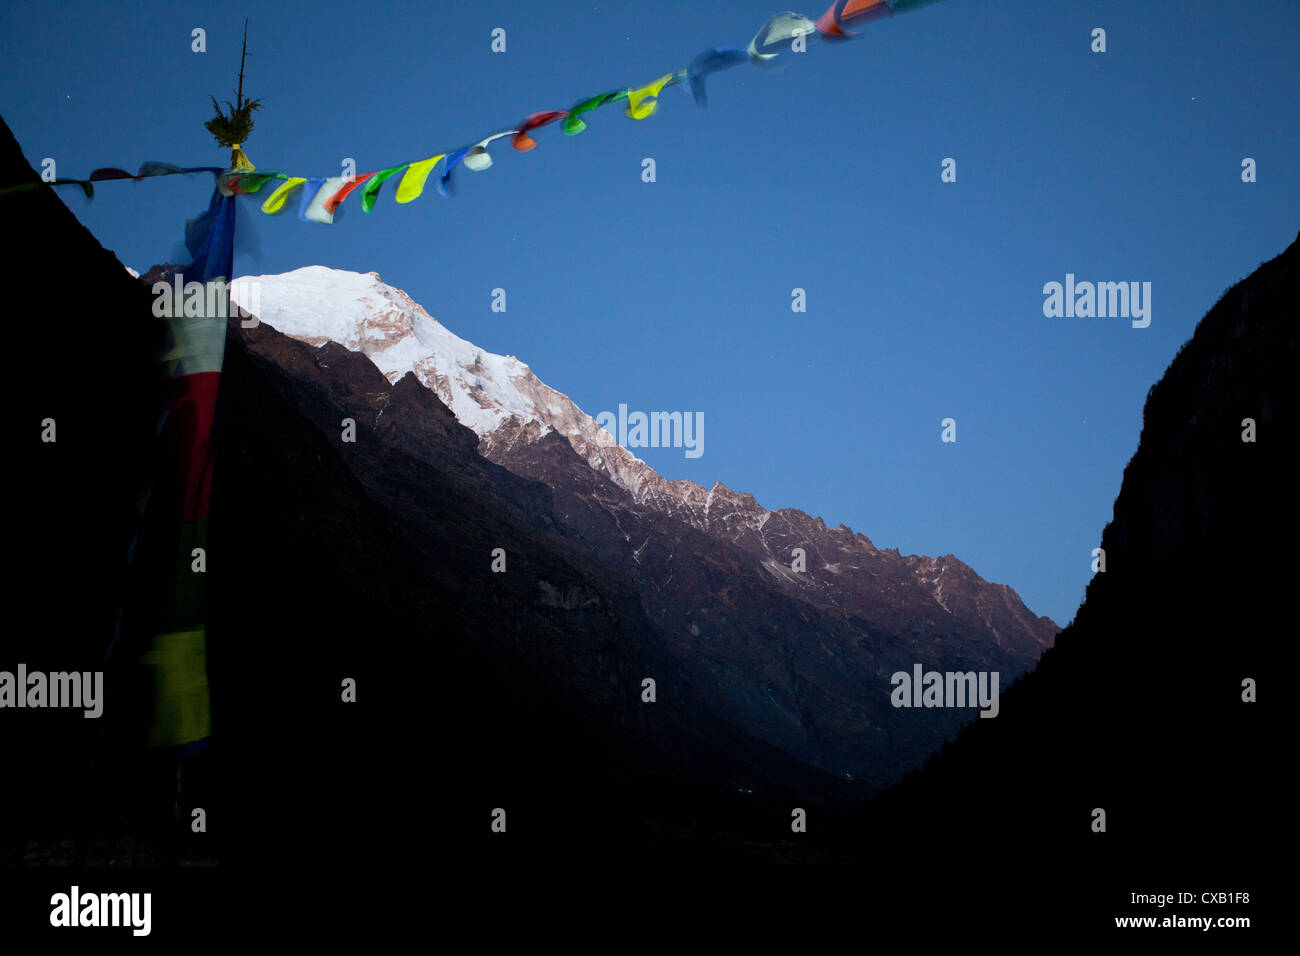 Buddhist prayer flags blowing in the wind with a snowcapped mountain in the distance, Langtang Valley, Nepal Stock Photo